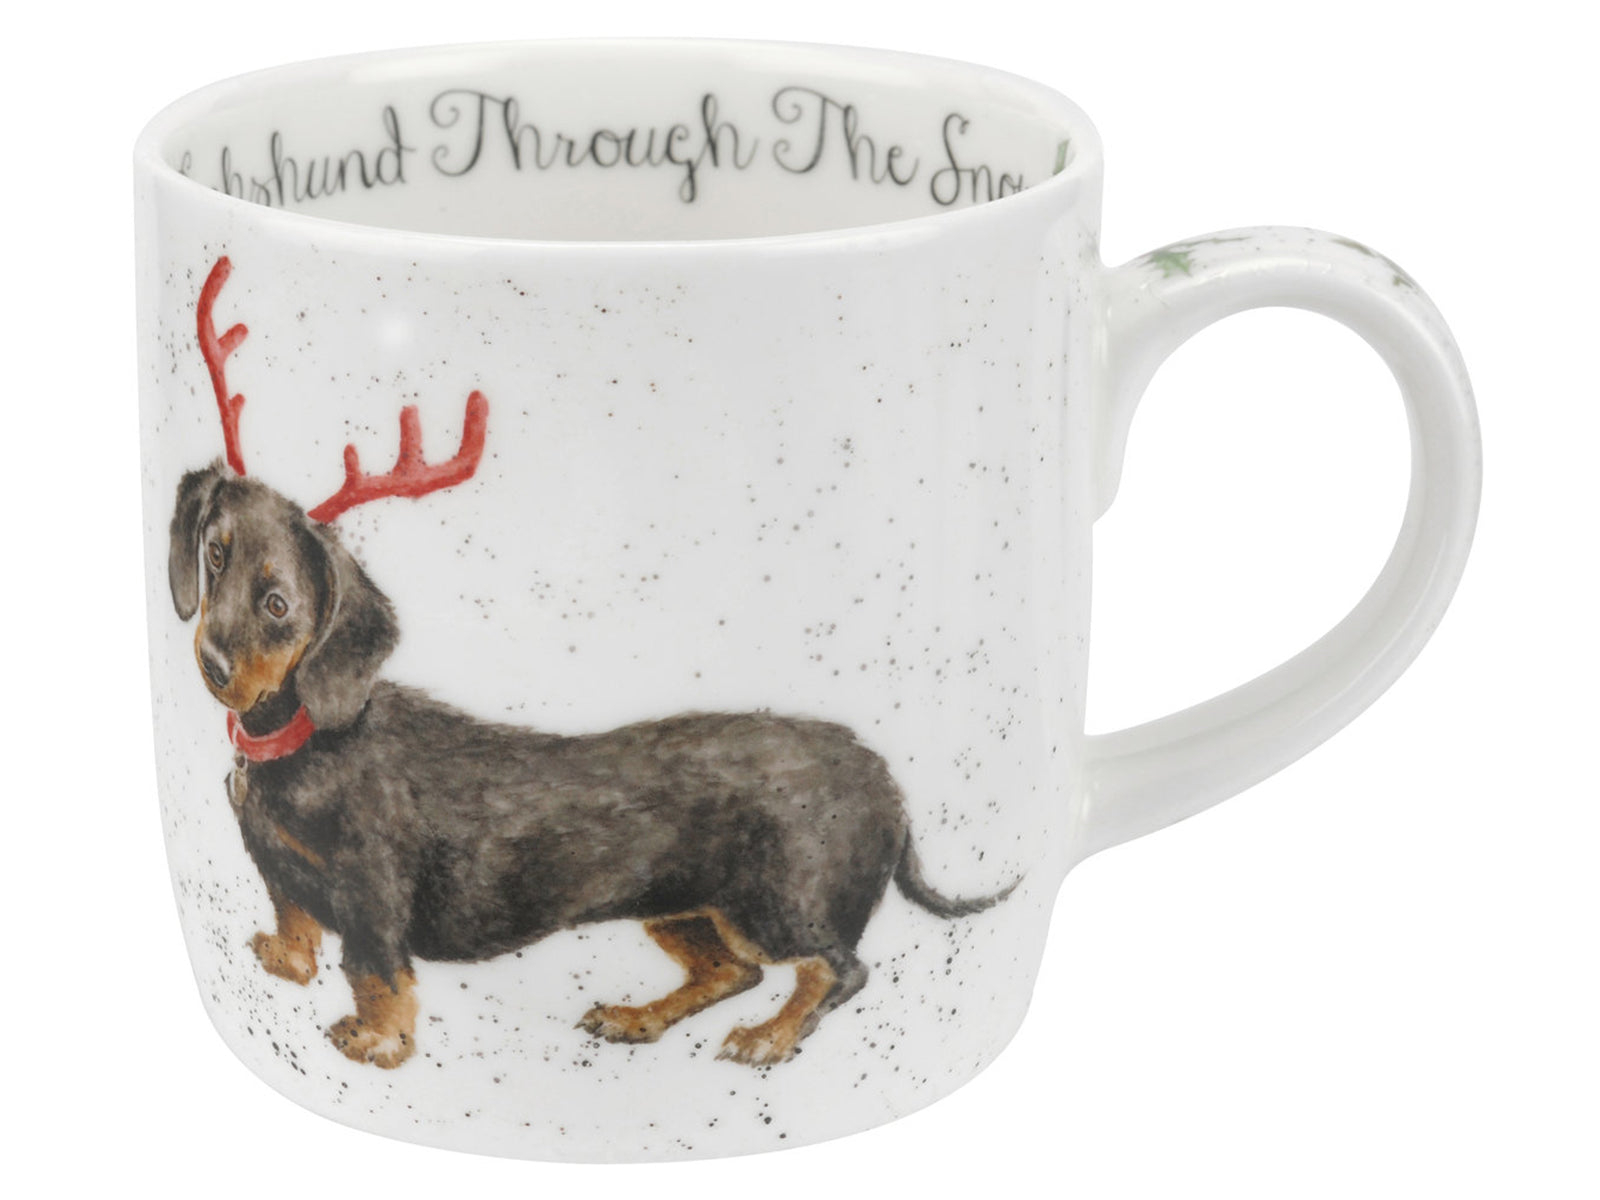 A white porcelain mug with a dachshund design on the front and the phrase 'dachshund through the snow' on the inside of the rim. The dog is wearing a red collar and red antlers